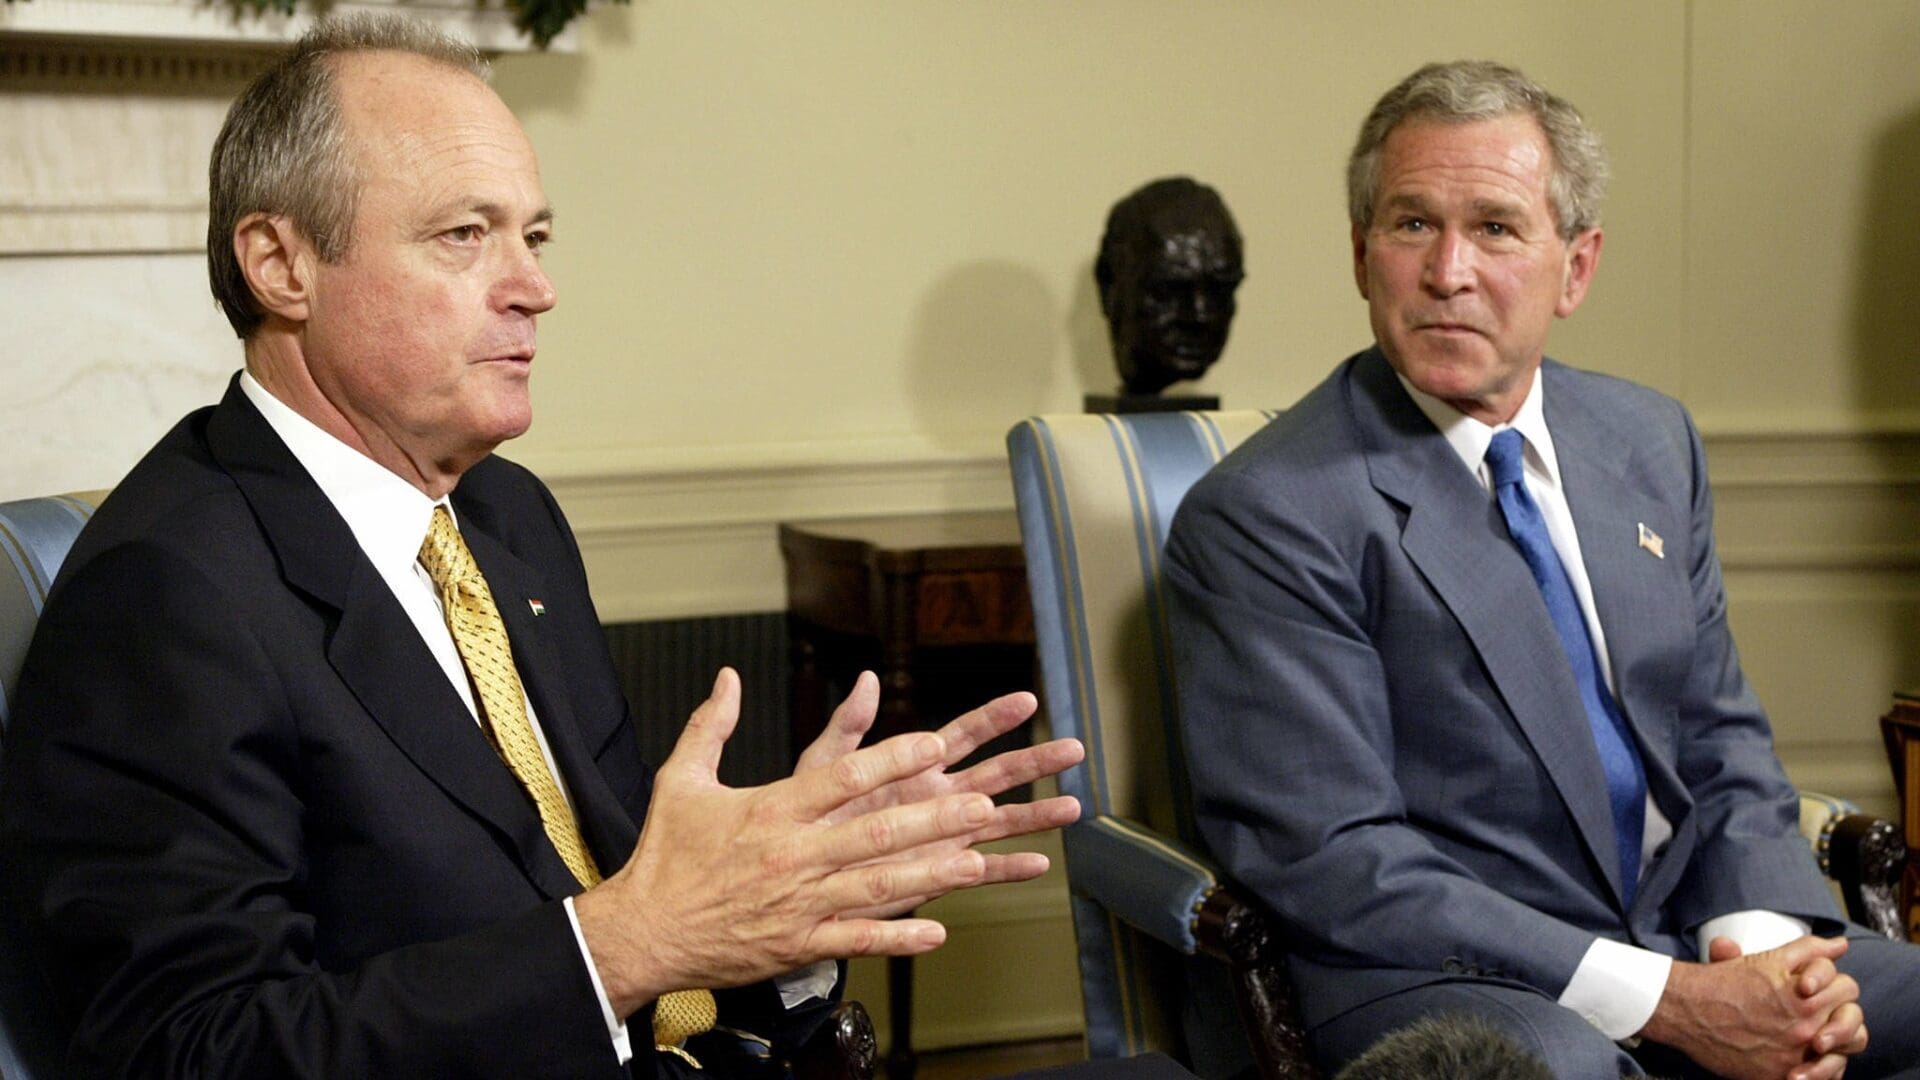 US President George W. Bush (R) listens to Hungarian Prime Minister Peter Medgyessy as he answers questions from the press after their Oval Office meeting 22 June, 2004, at the White House in Washington, DC.